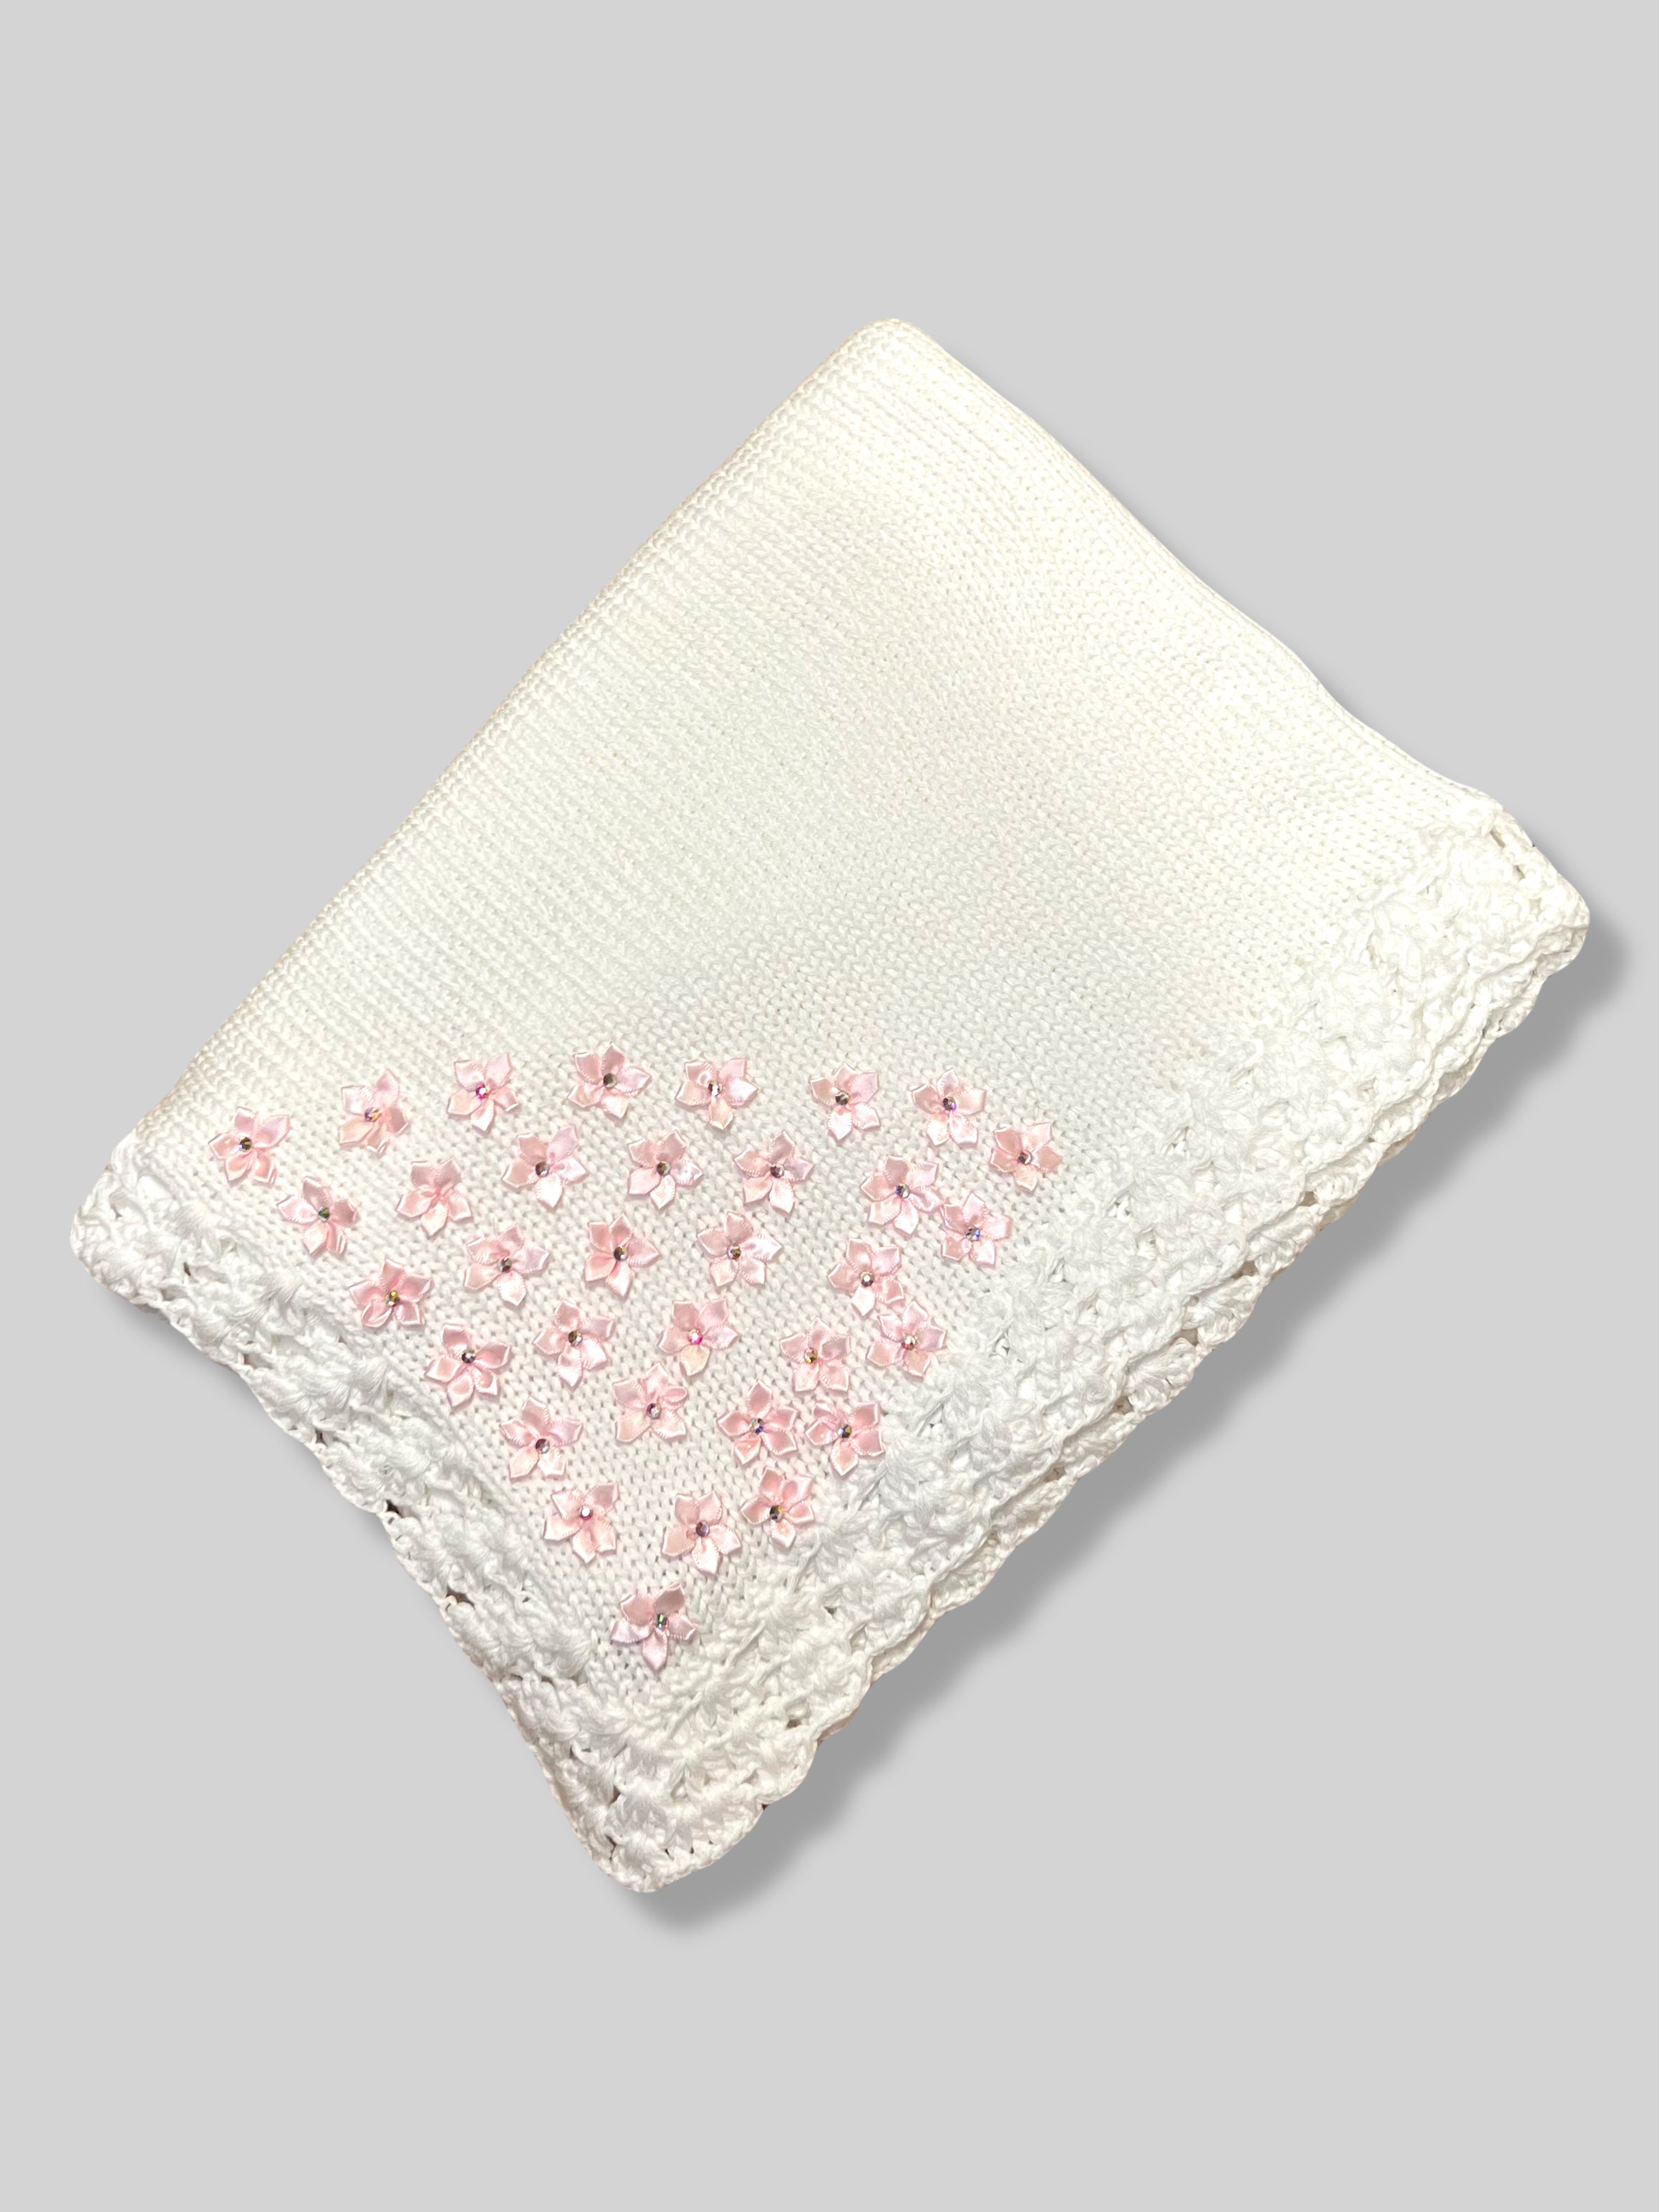 White Cotton Blanket with Pink Satin Flowers